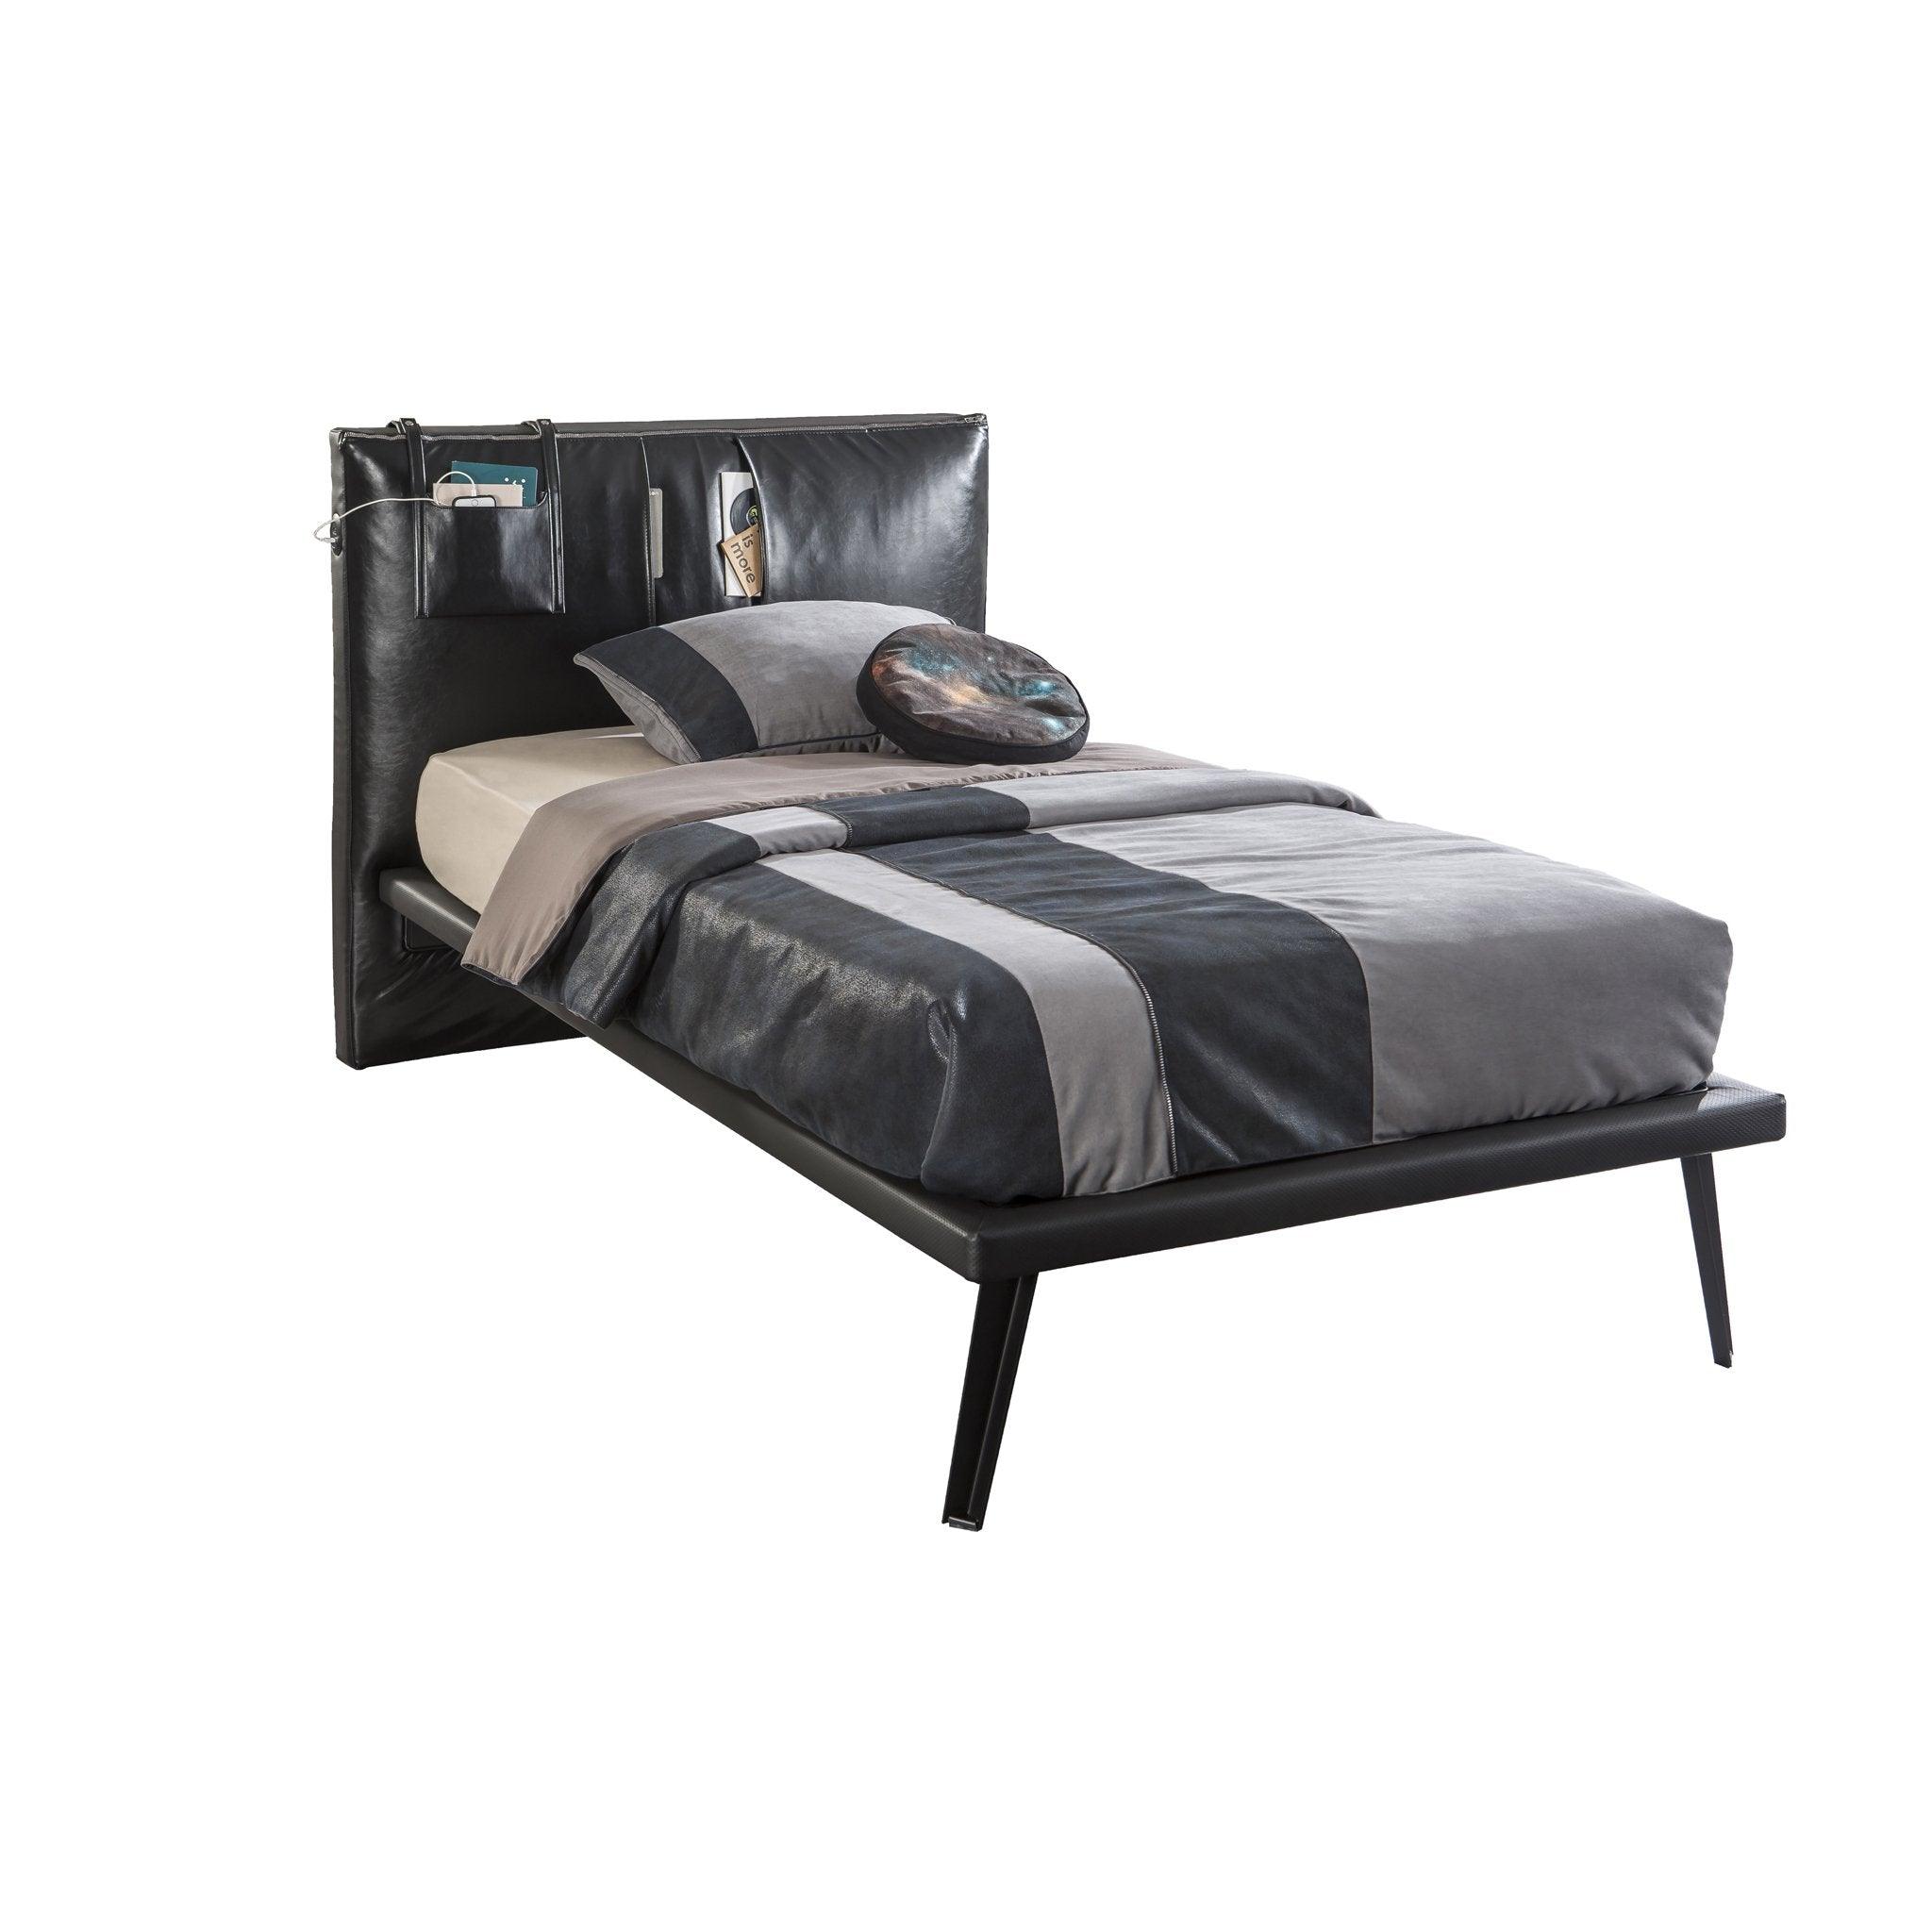 Cilek Dark Metal Bed (100X200 Cm Or 120X200 Cm - With Pull Out Options)